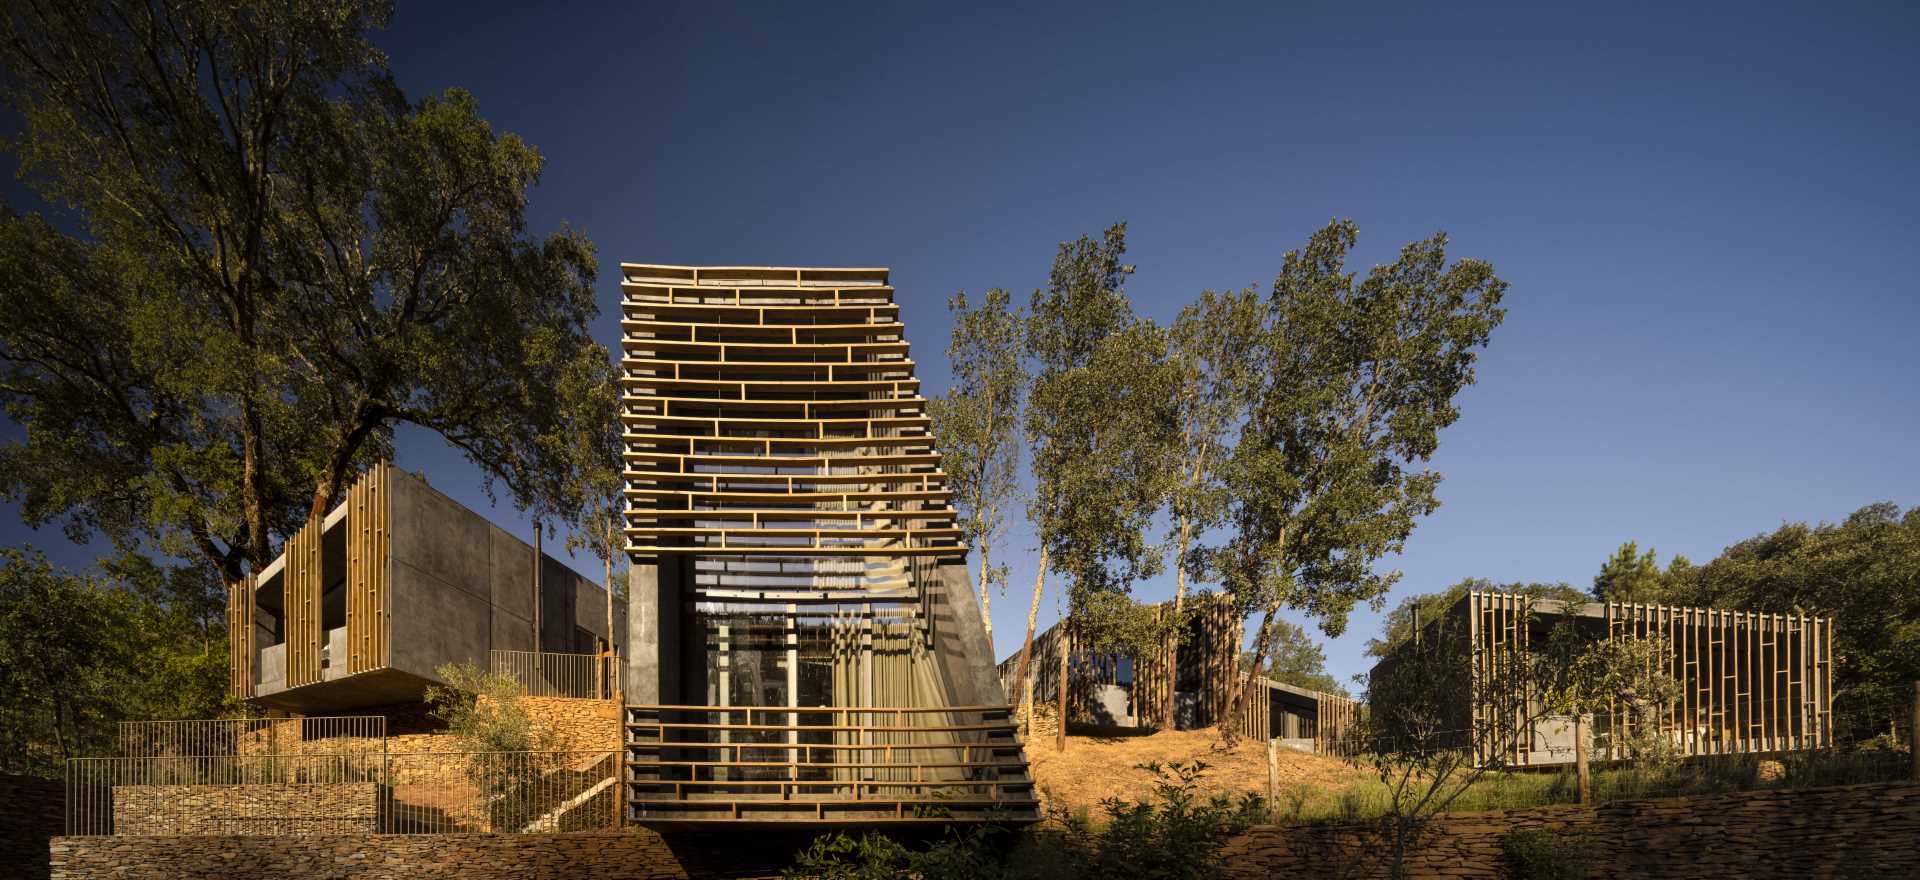 A collection of small homes that double as tourist cabins.